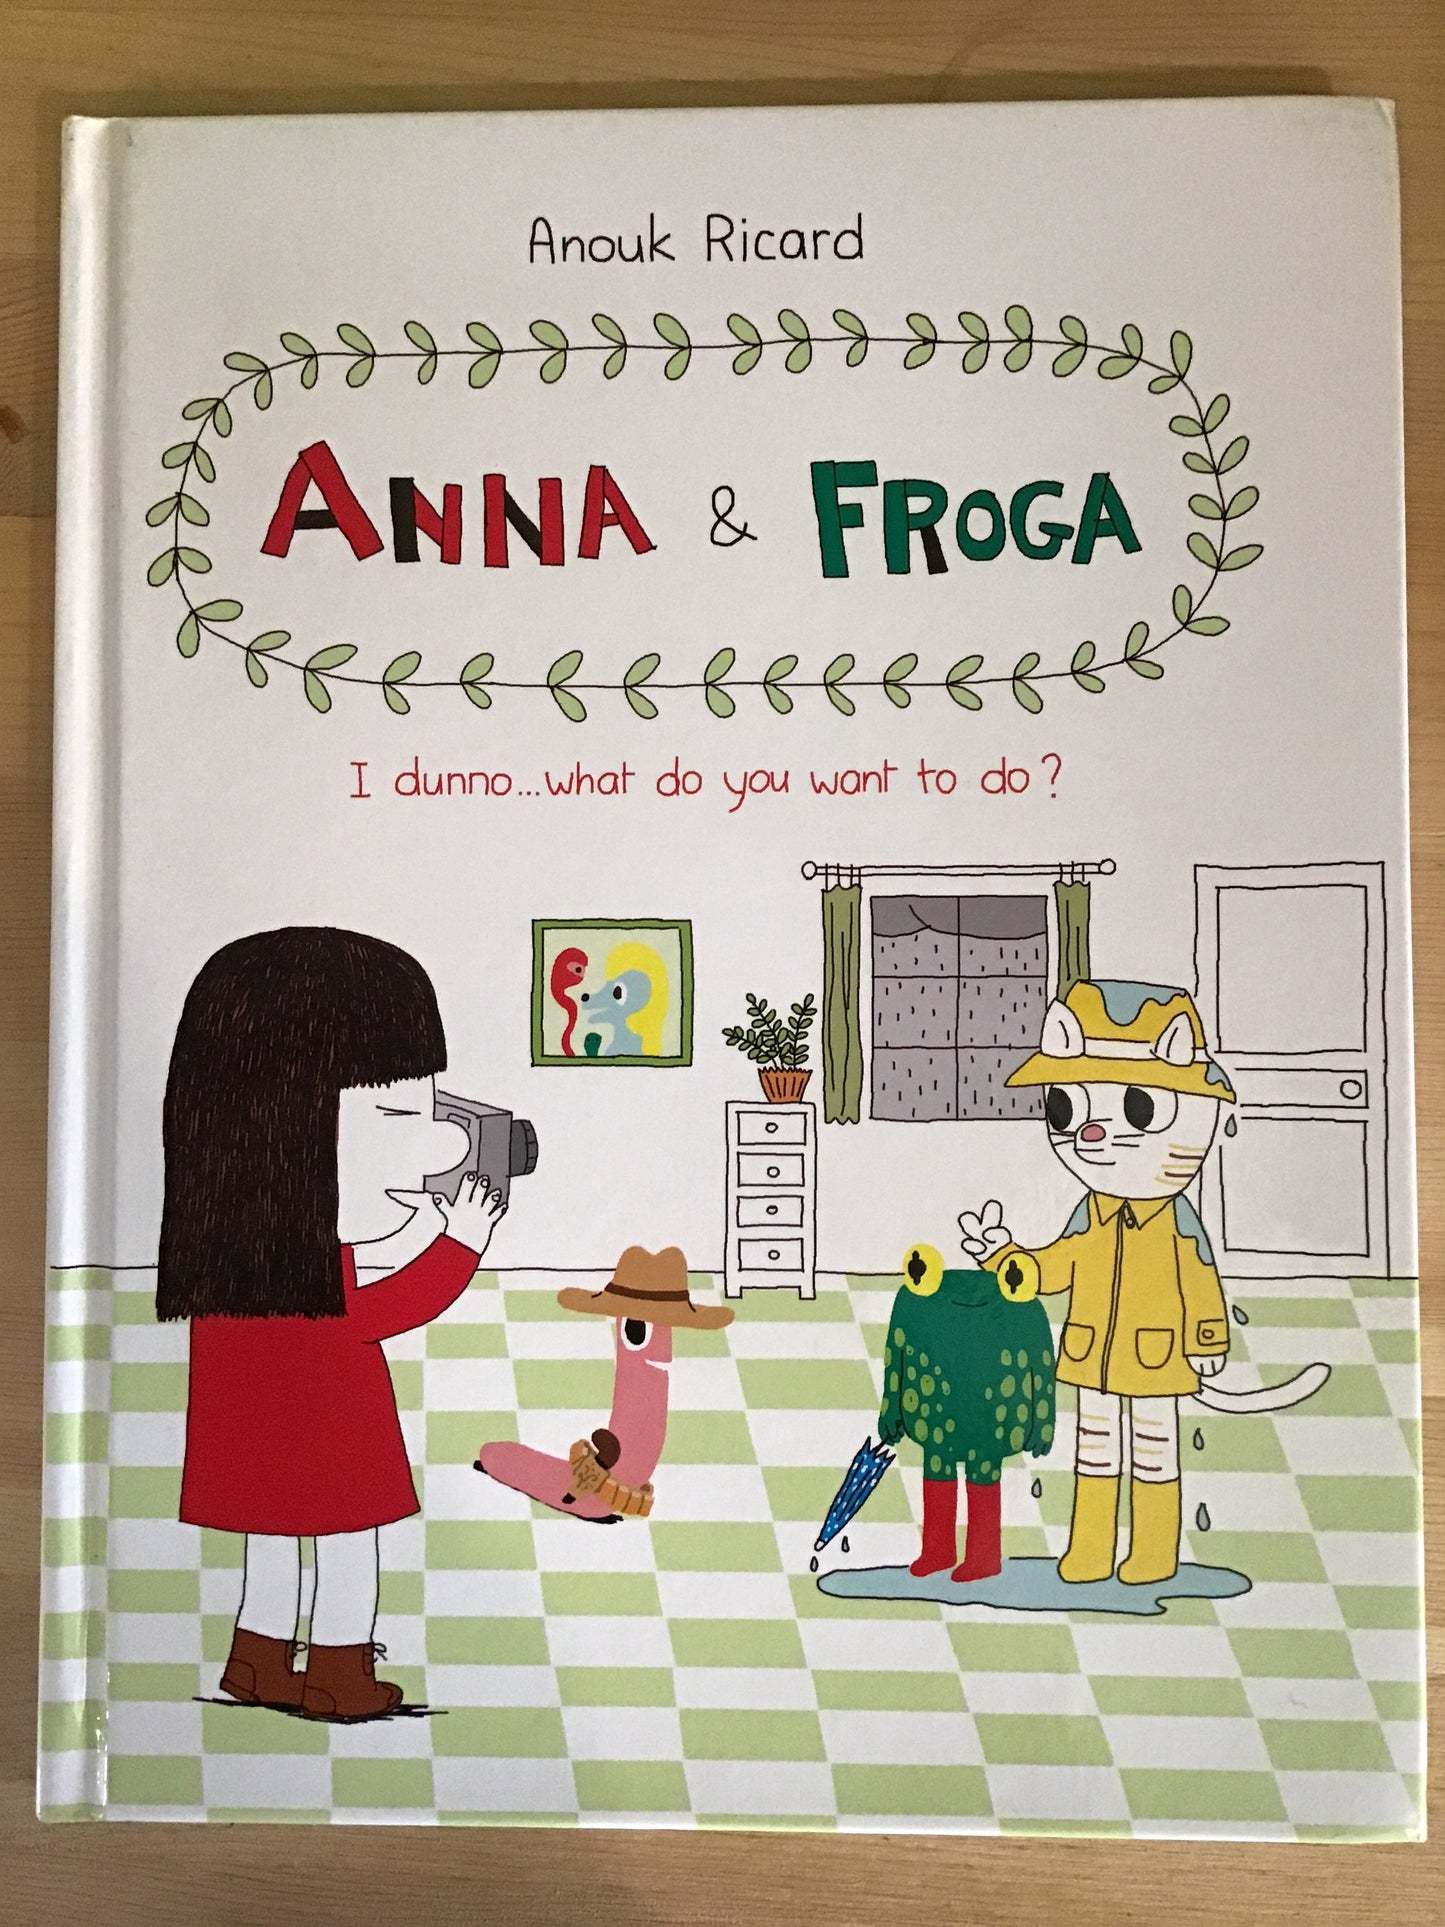 Anna & Froga: I dunno...what do you want to do?